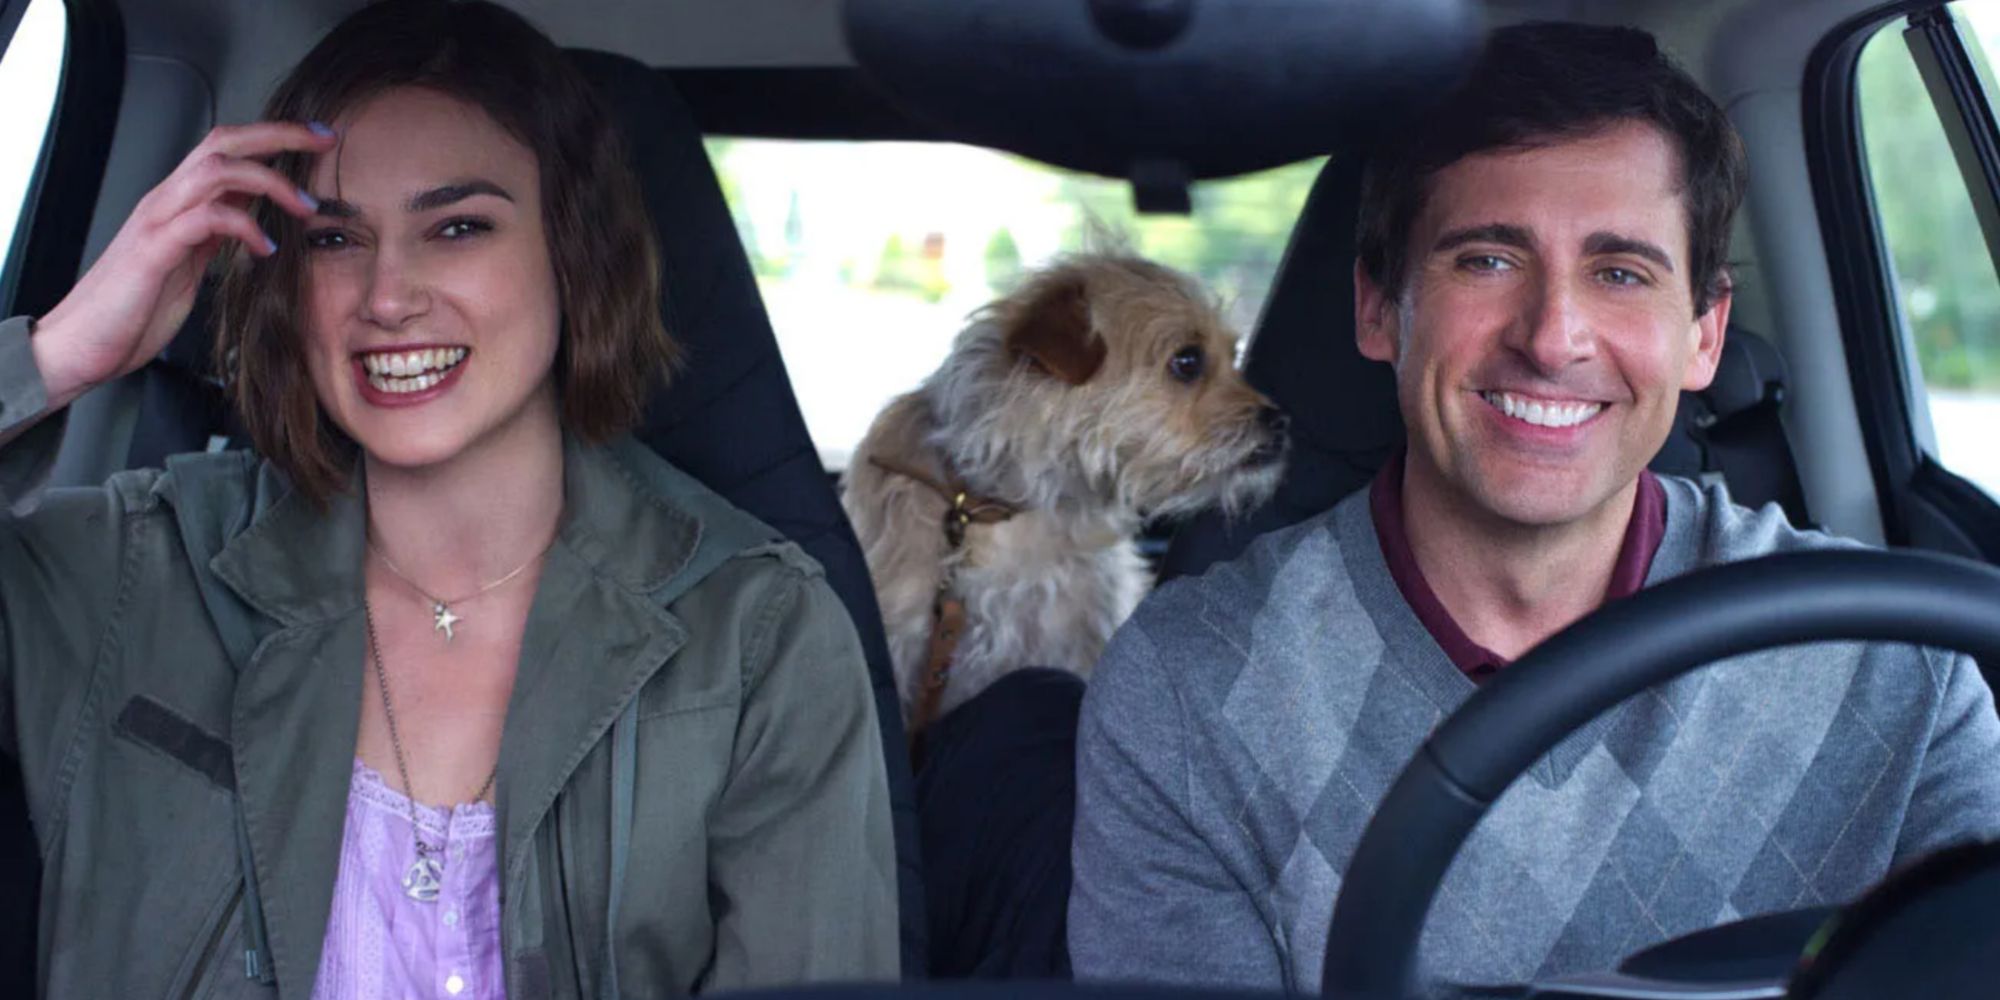 A young woman and man in car with dog laughing